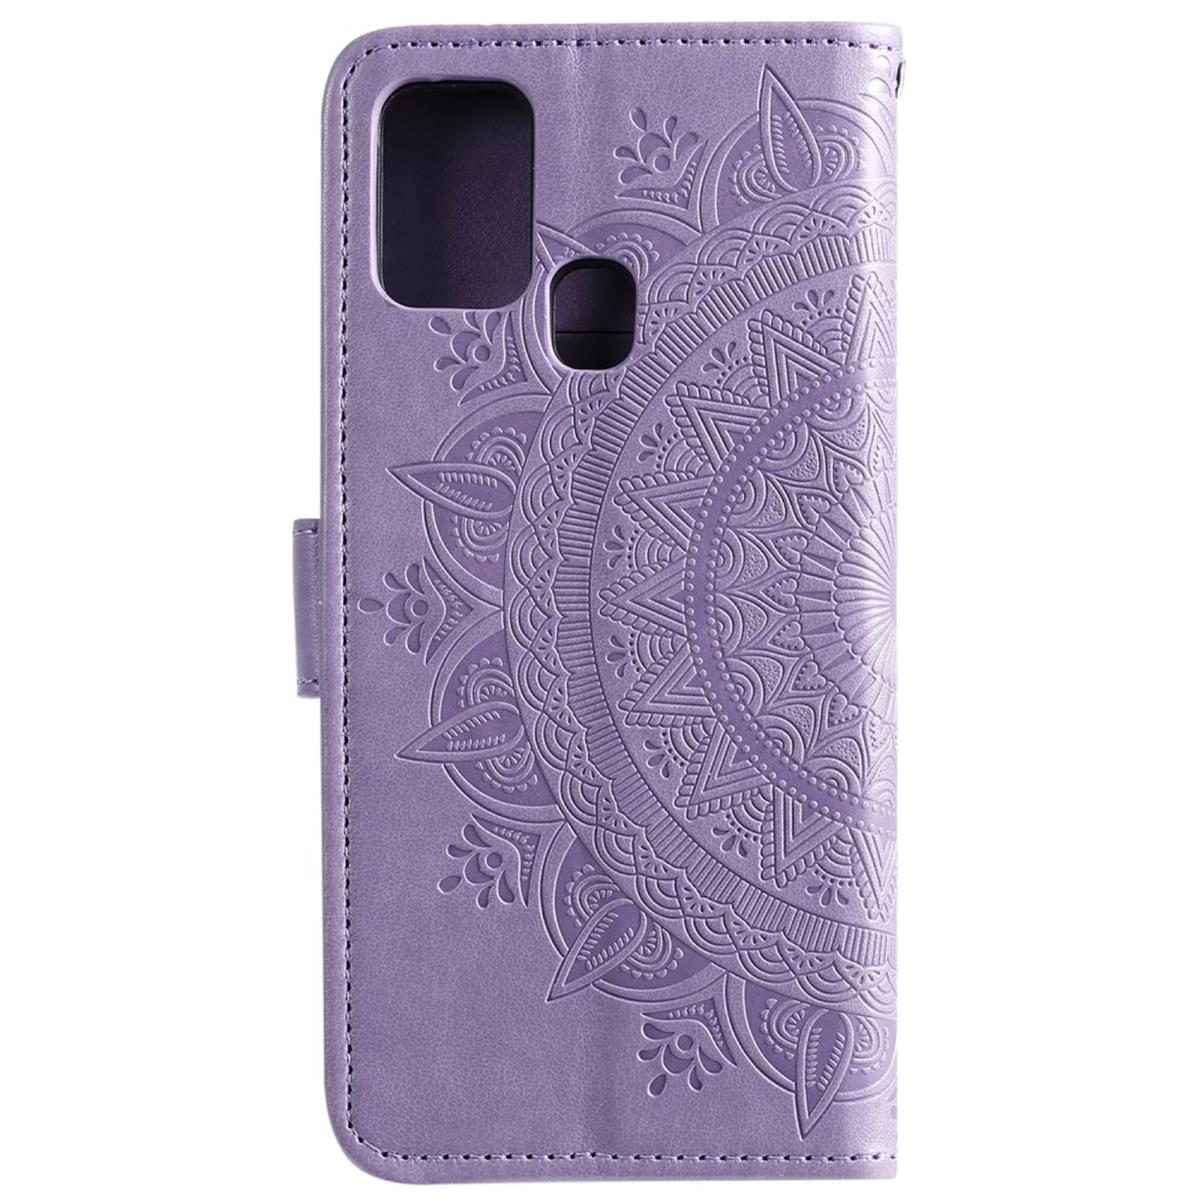 COVERKINGZ Klapphülle mit Mandala Muster, Lila Y6p, Bookcover, Huawei